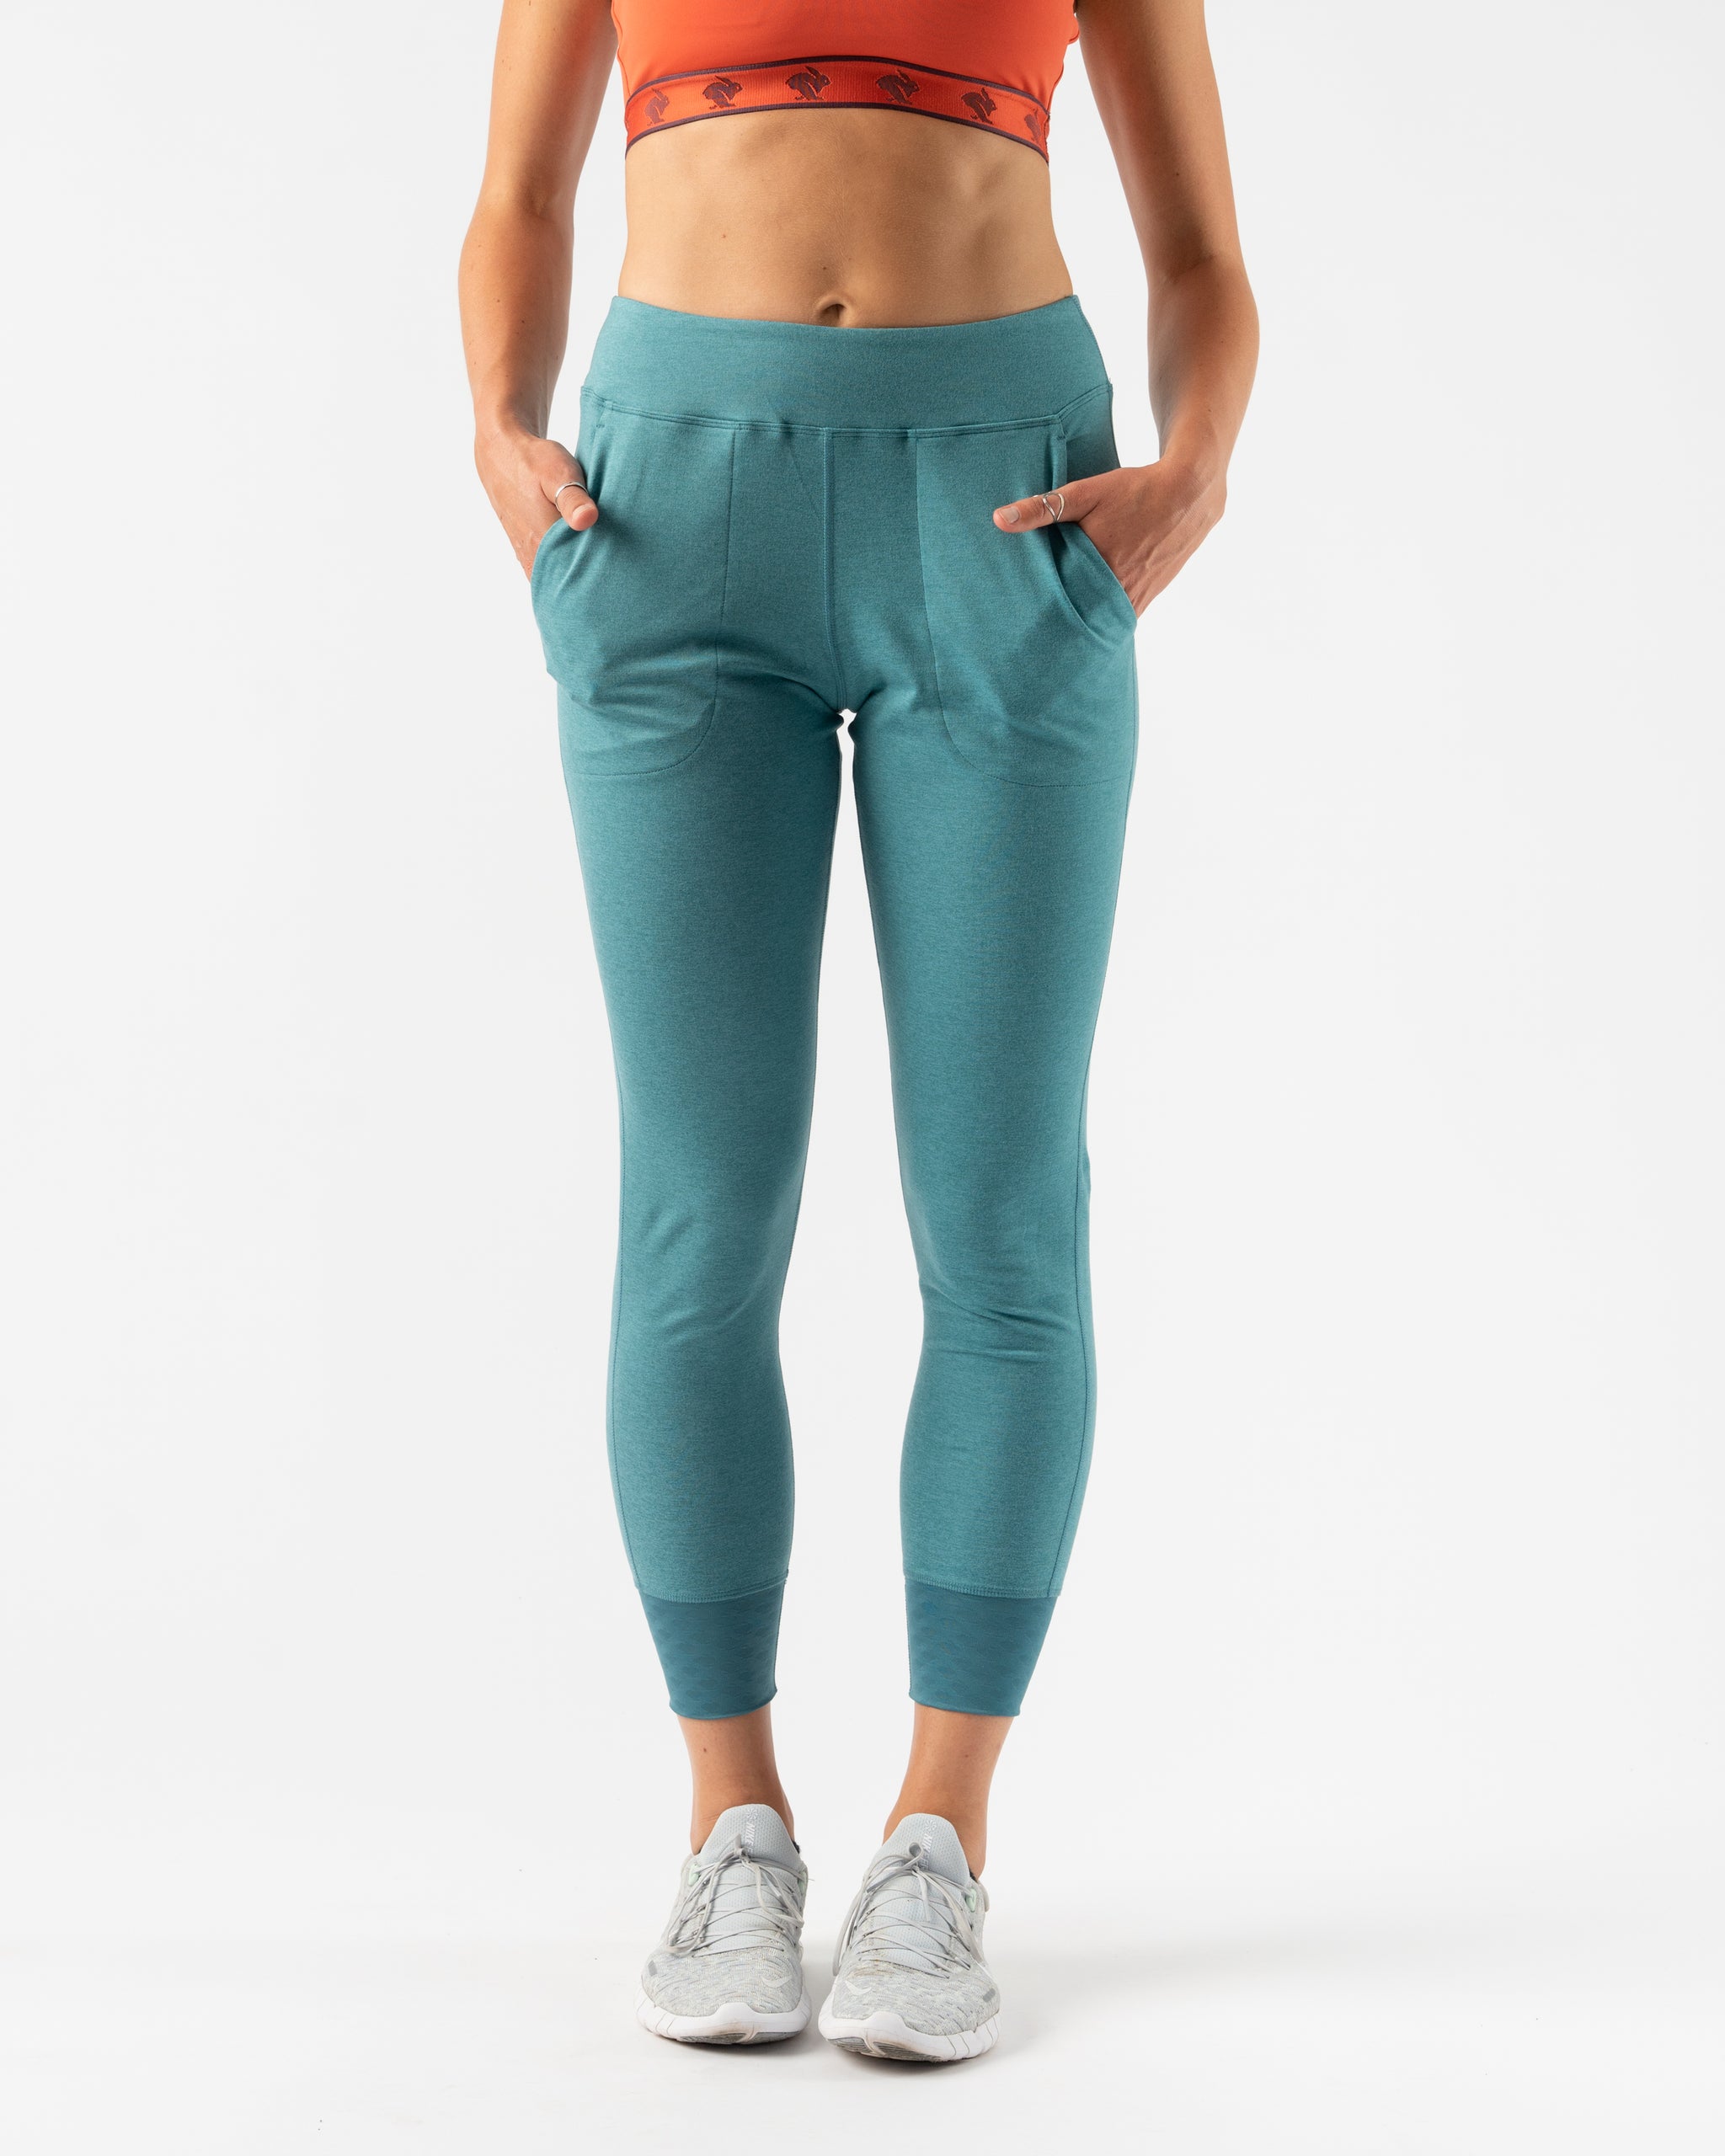 Warm Down Joggers 7/8 Length in 2023  Joggers womens, Lululemon joggers  women, Warm down